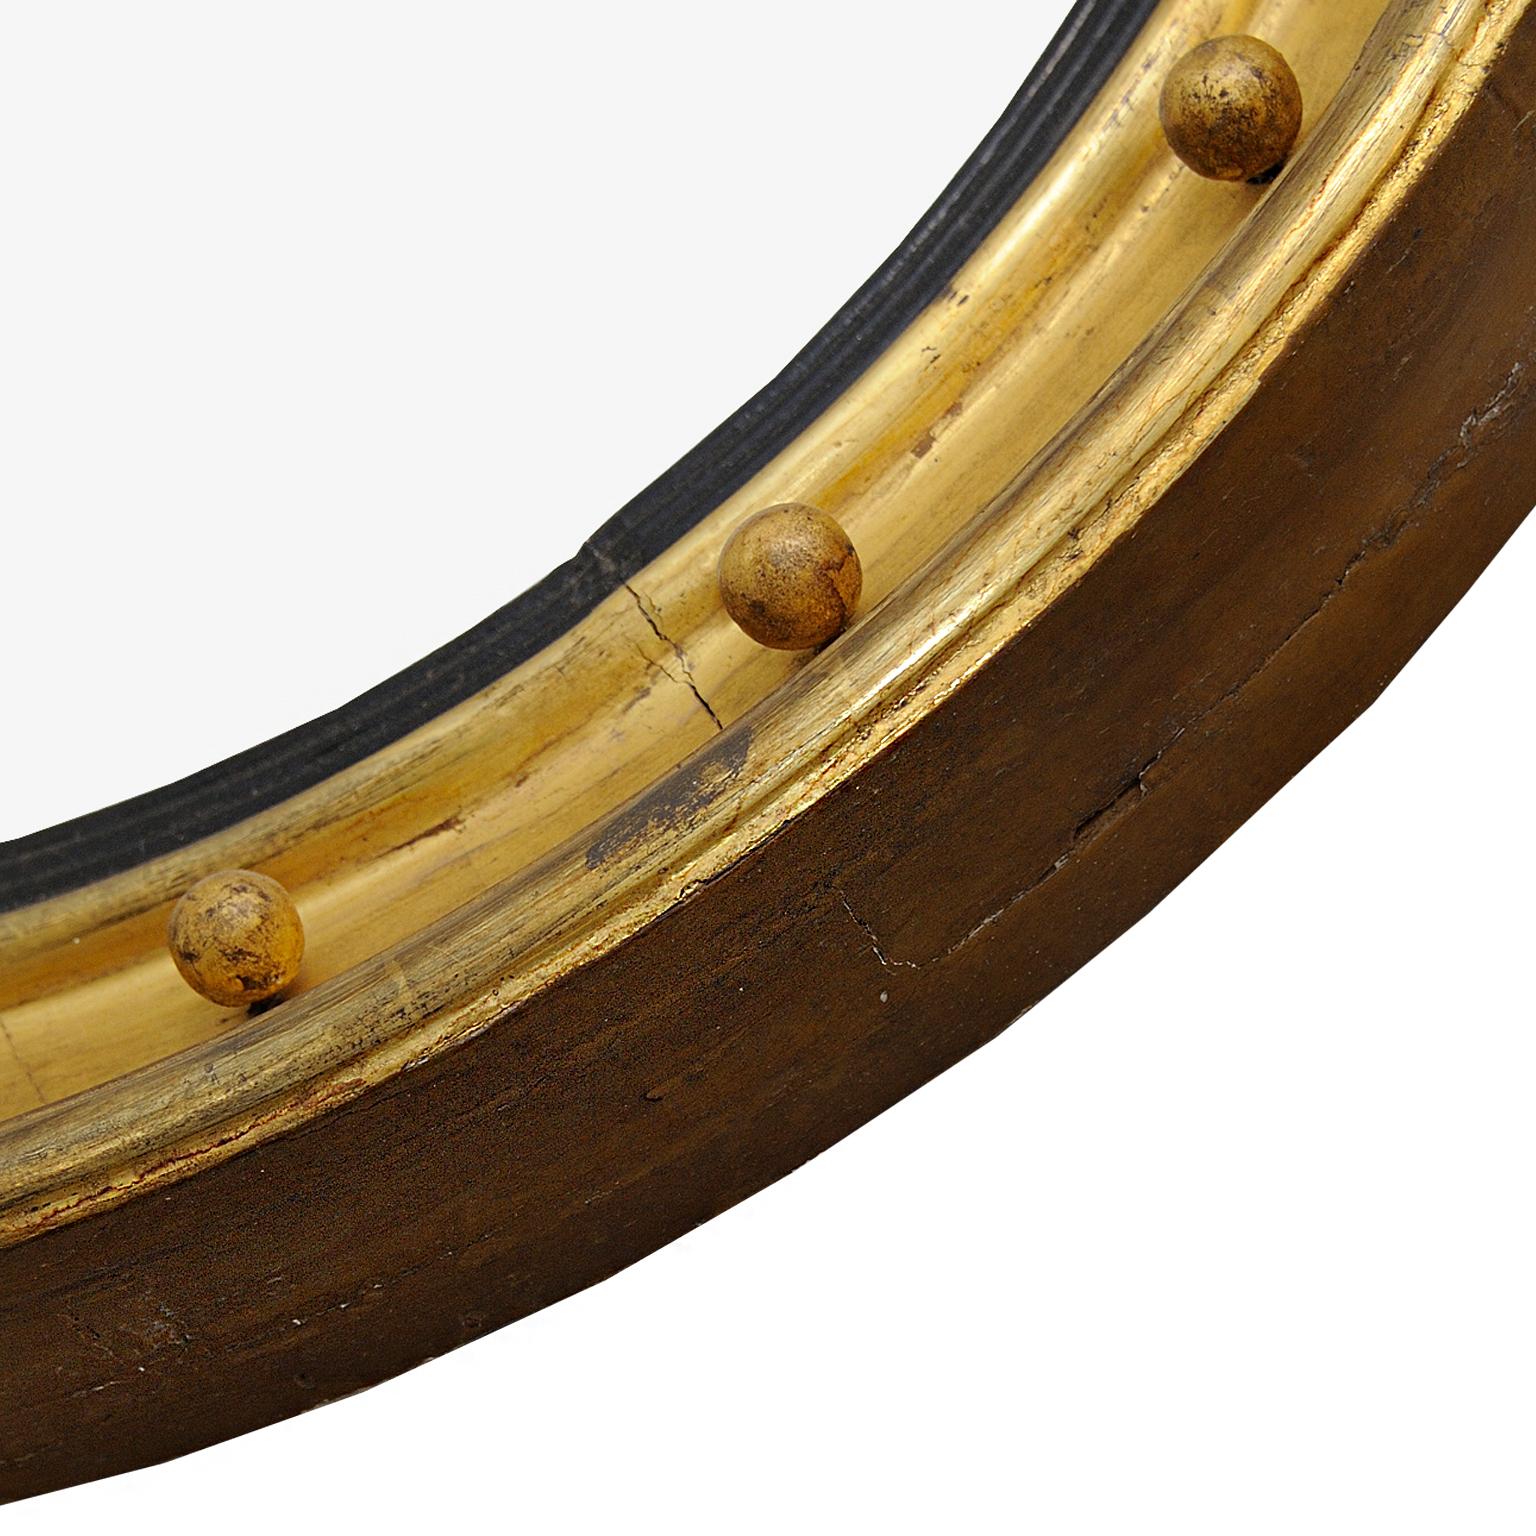 This is a large and stylish early 19th century English Regency giltwood convex mirror with original mirror plate and back boards, circa 1810.